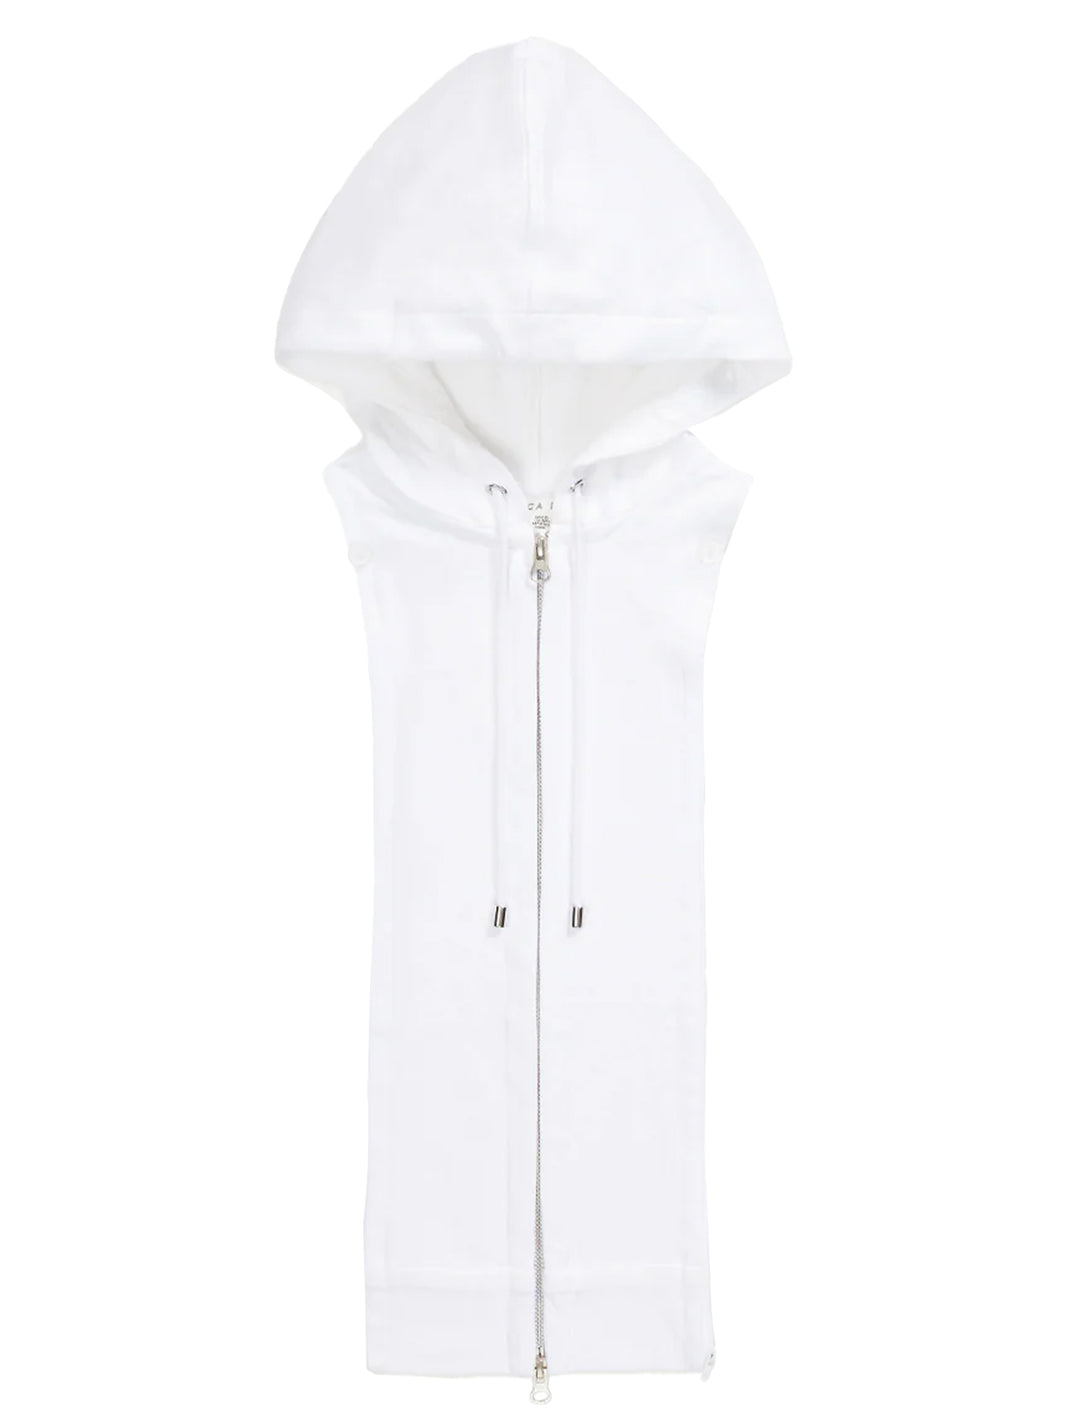 Front view of Veronica Beard's hoodie dickey in white.